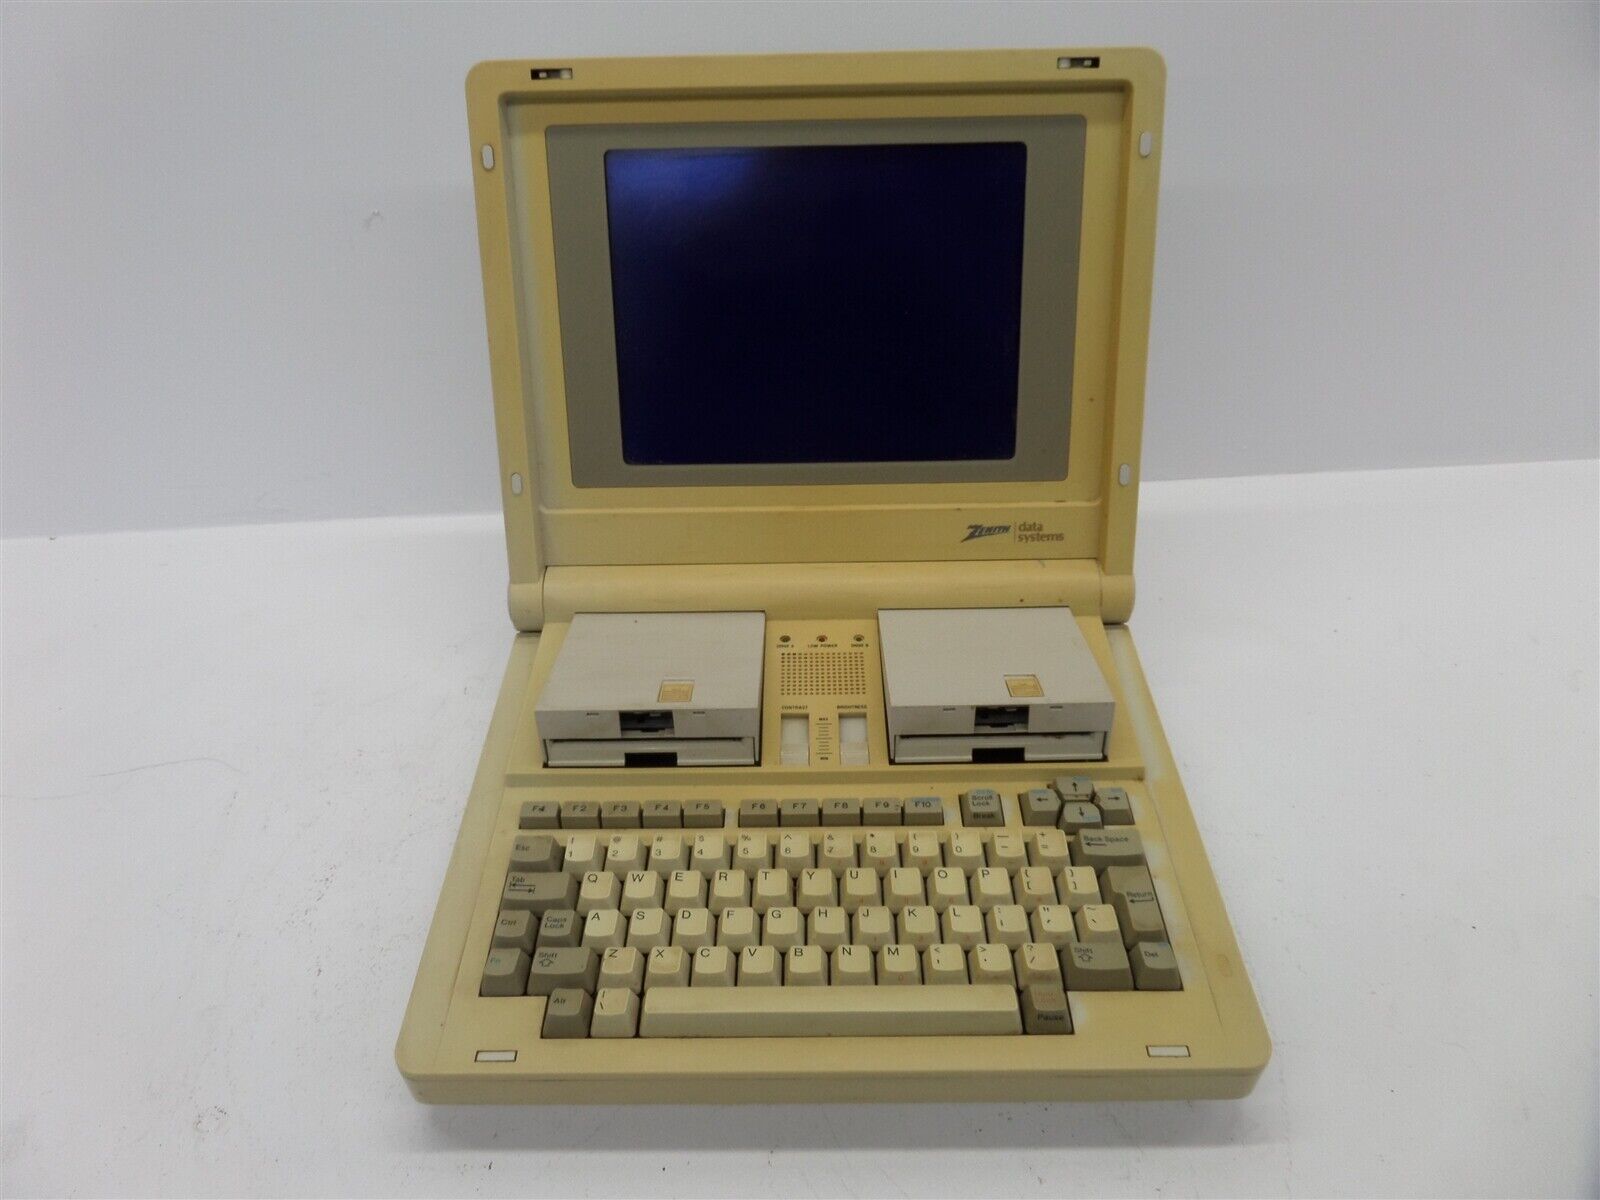 Vintage Zenith Data Systems ZFL-181-93 Laptop Computer